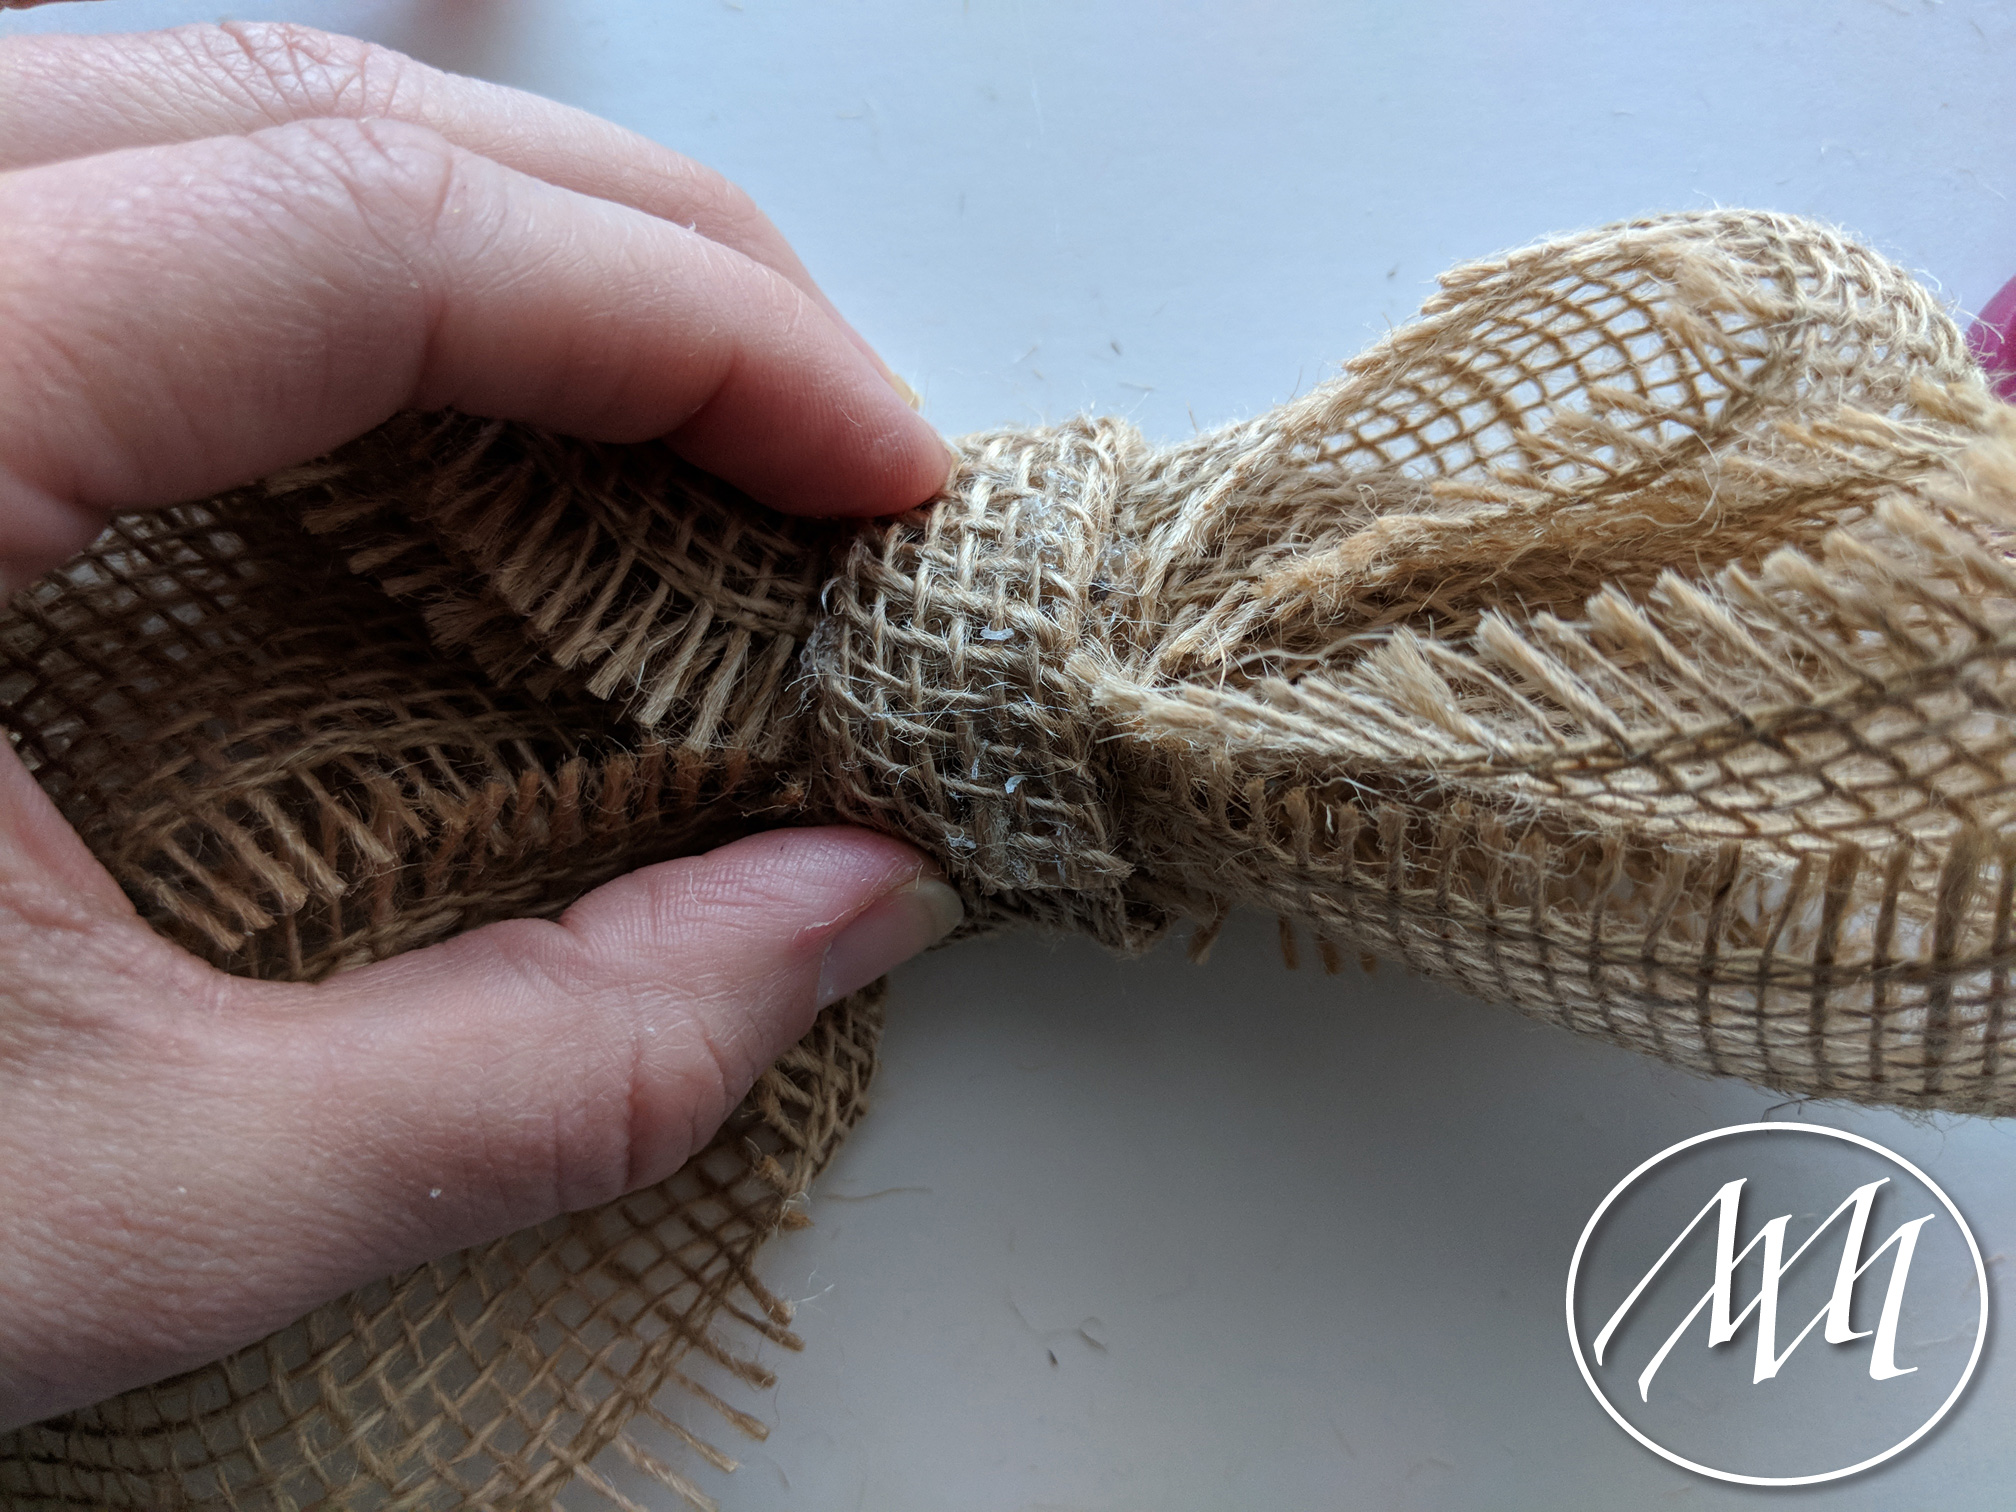 How to make a burlap bow